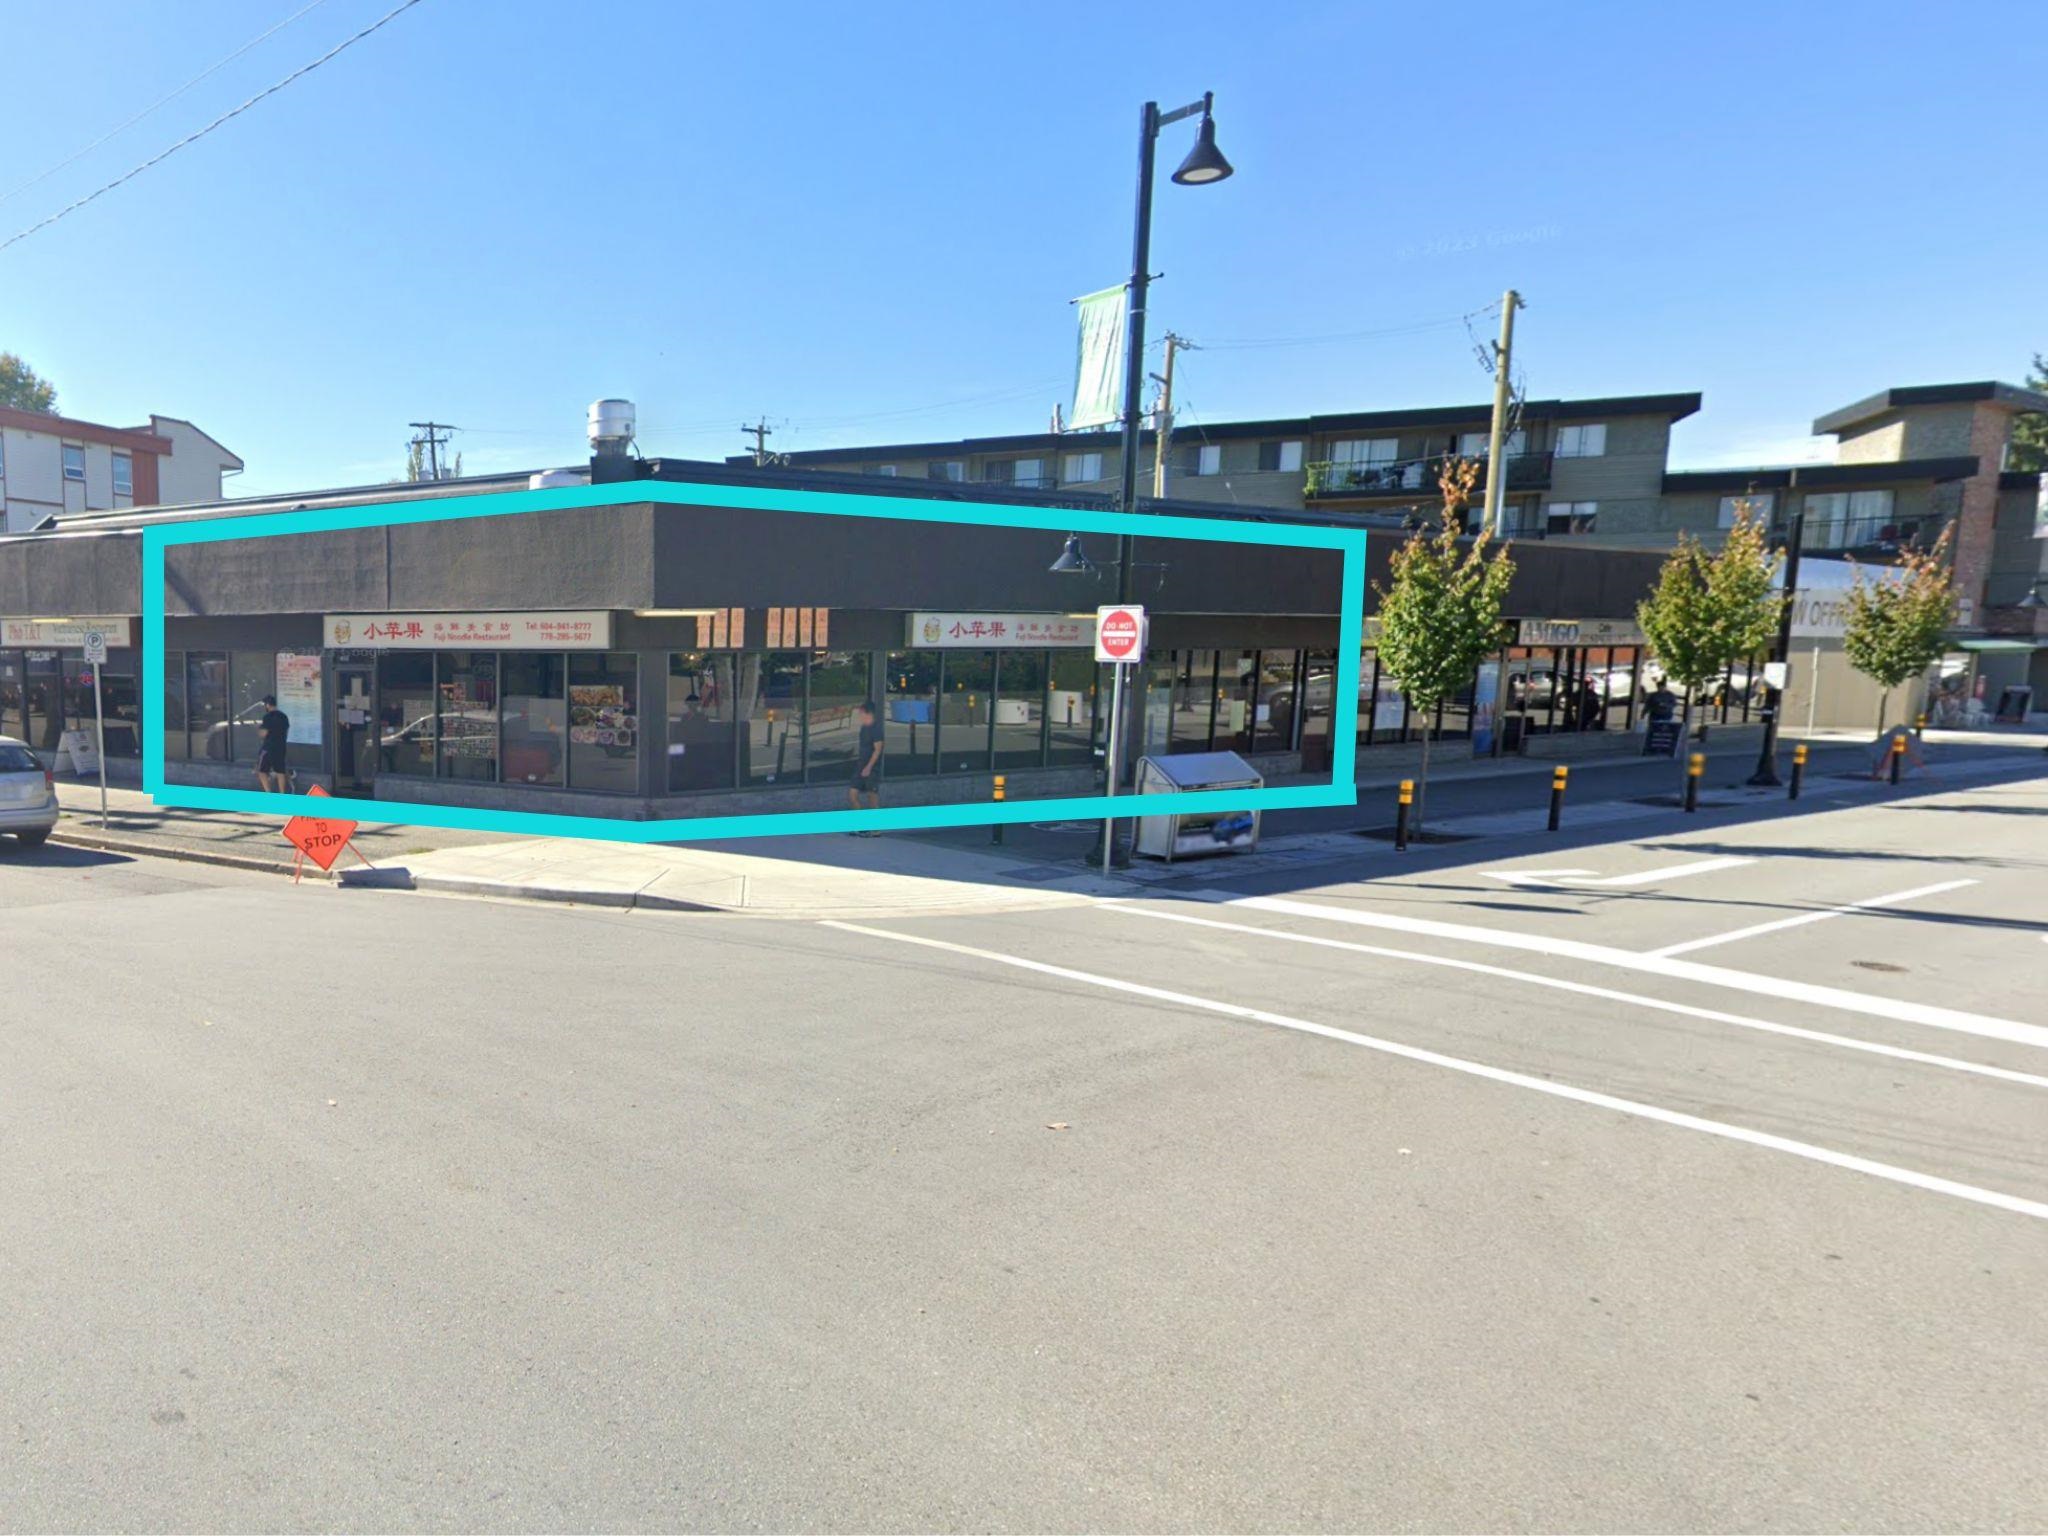 Central Pt Coquitlam Land Commercial for sale:    (Listed 6800-05-06)